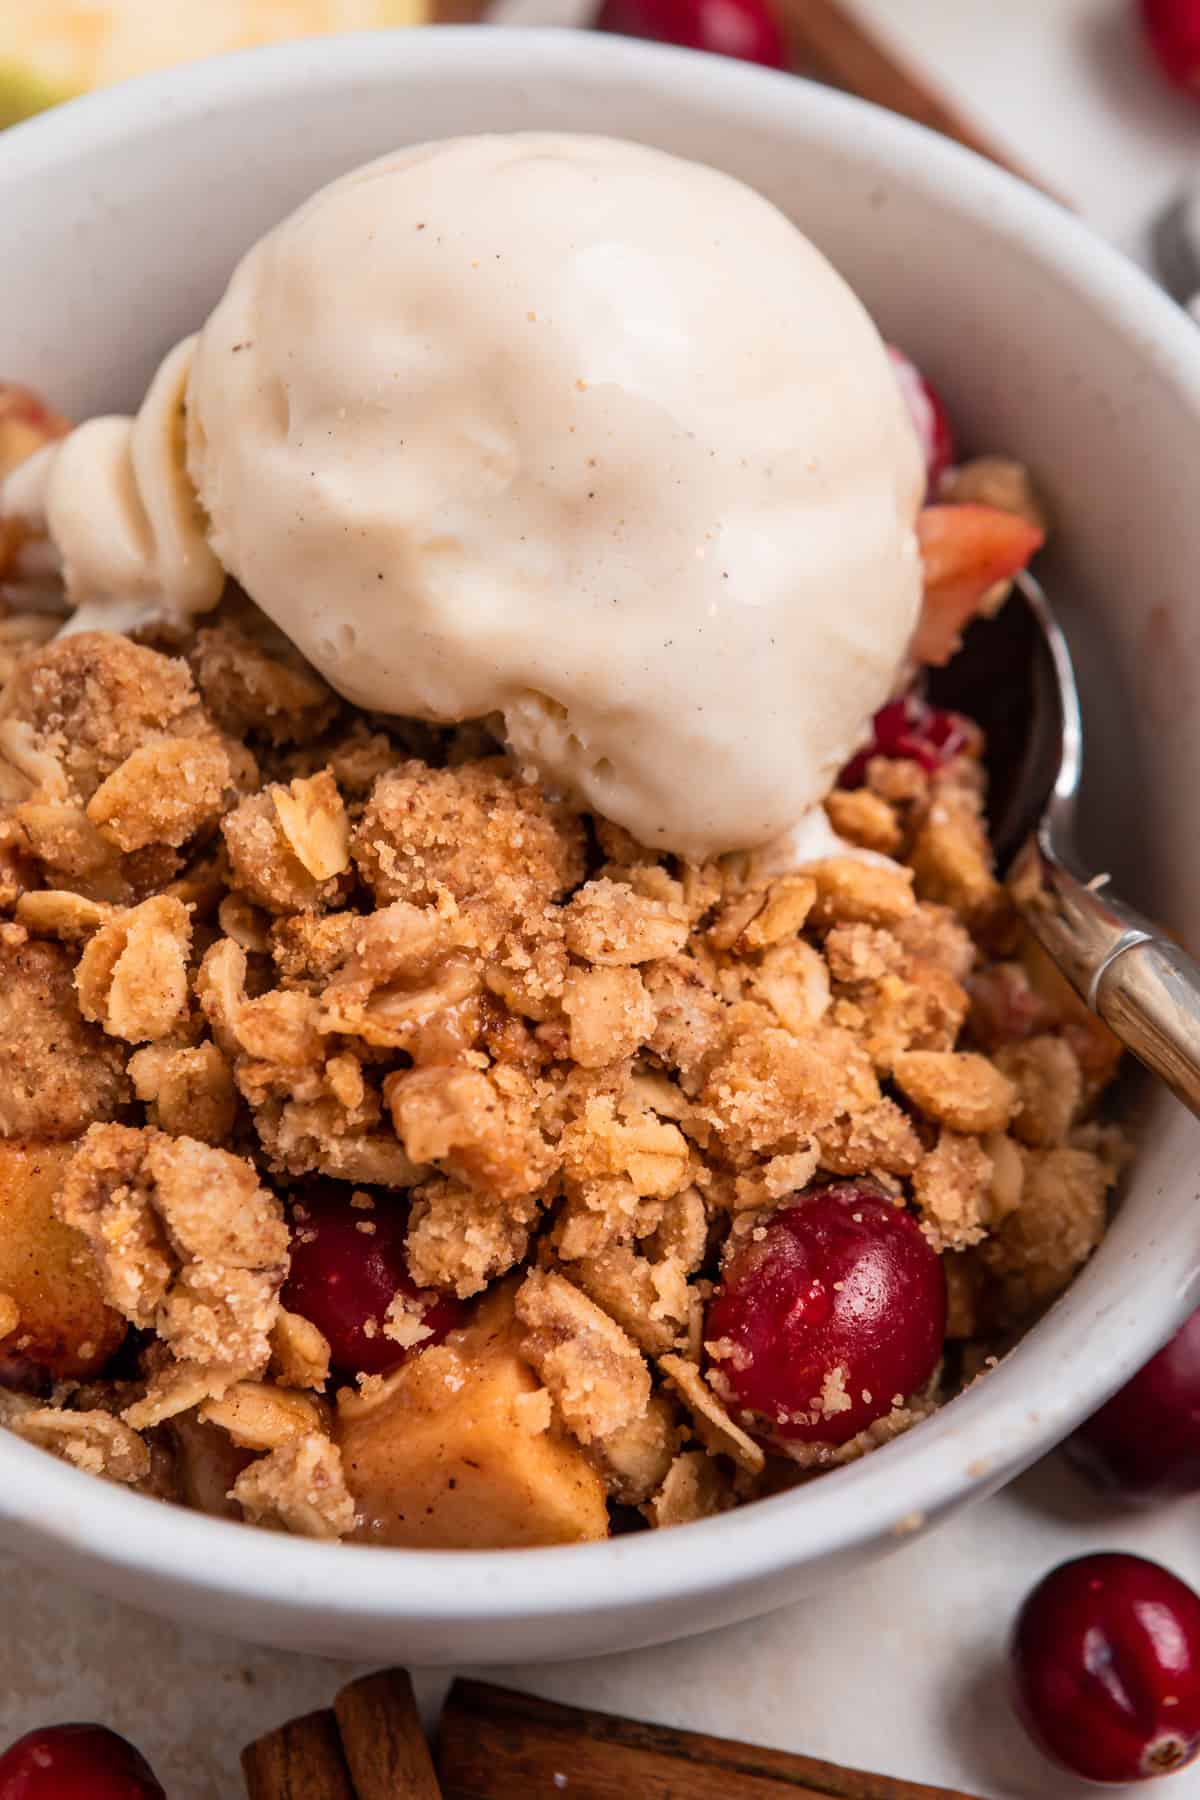 Cranberry Apple crisp with vanilla ice cream scooped on top and spoon.